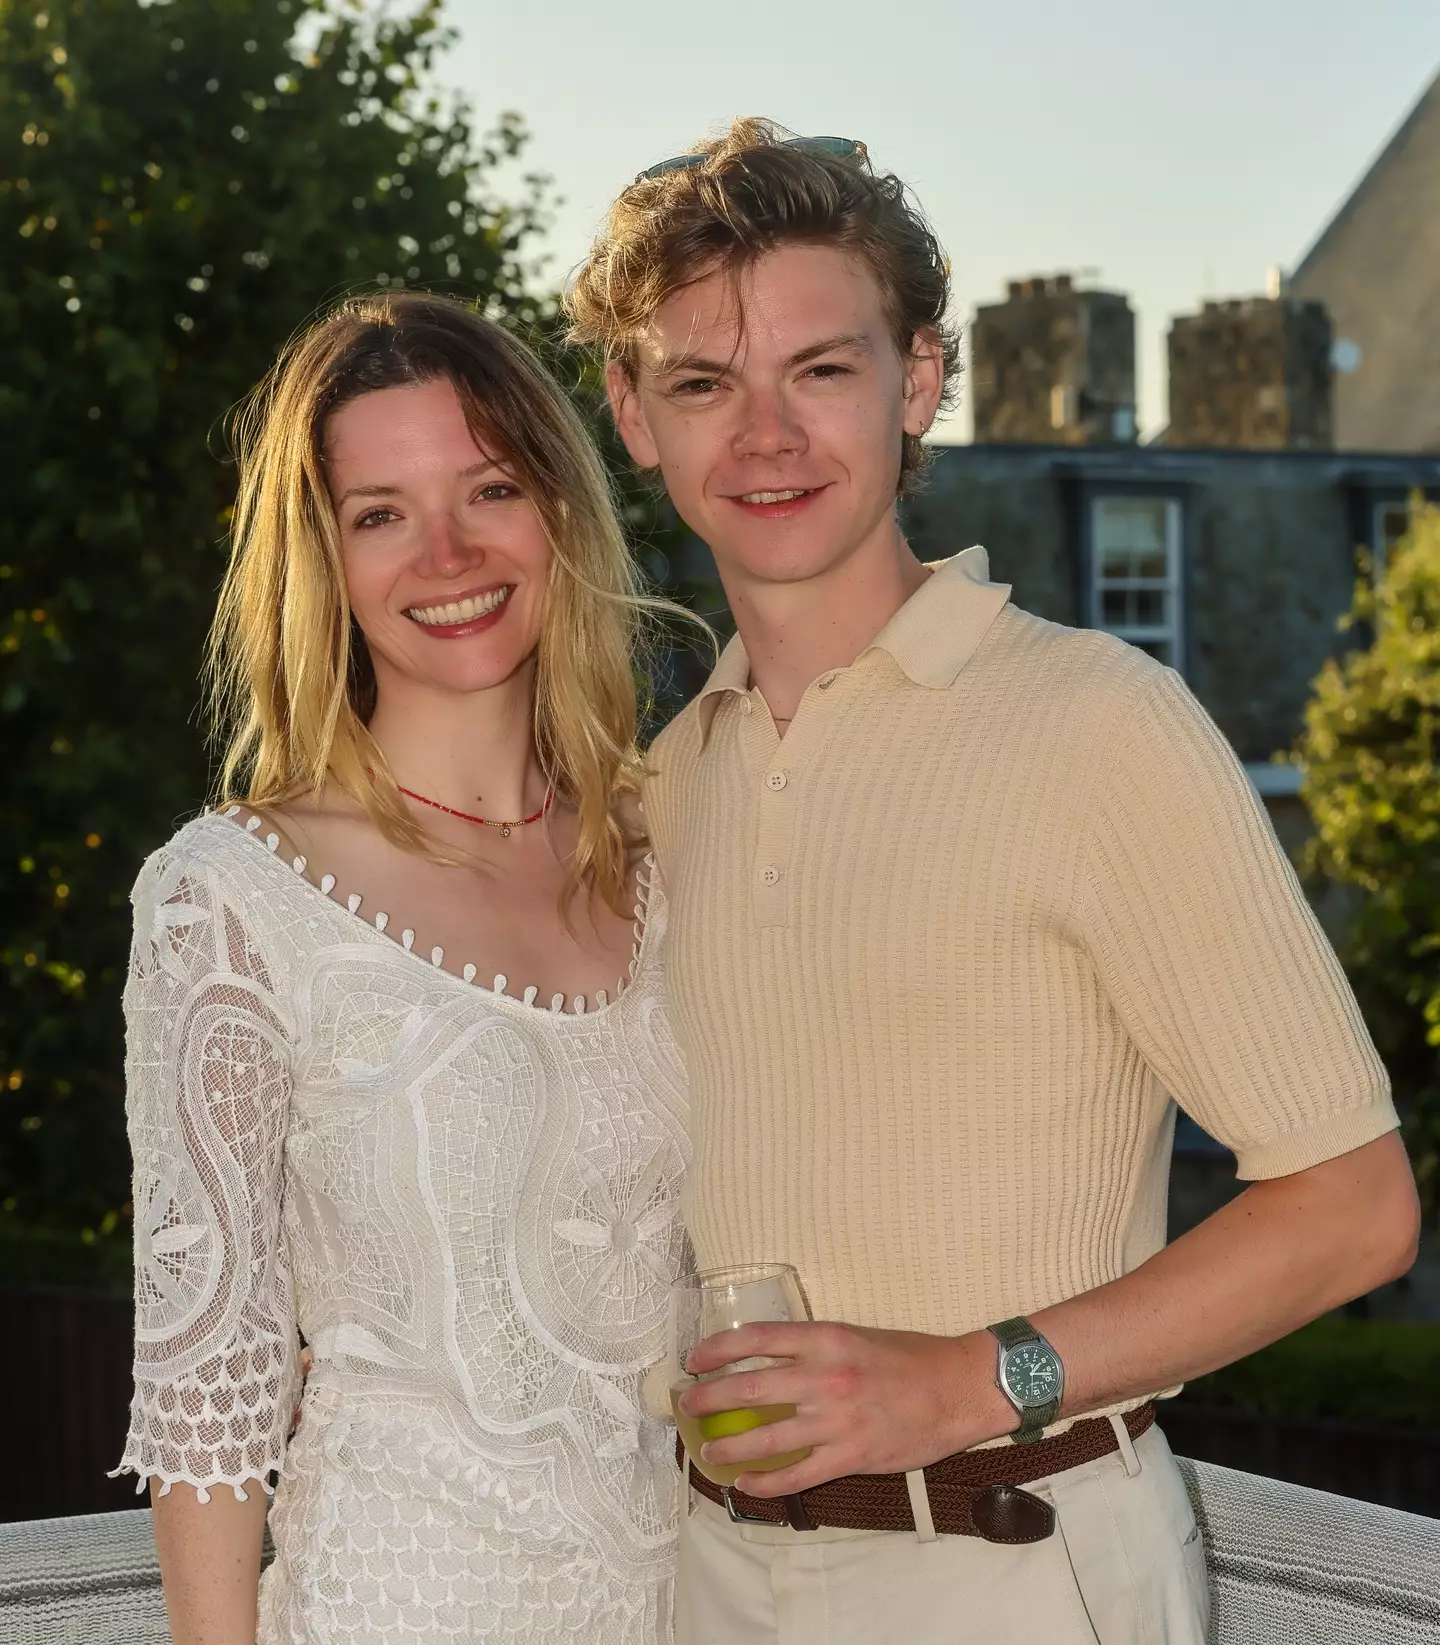 Talulah Riley and Thomas Brodie-Sangster are now engaged.